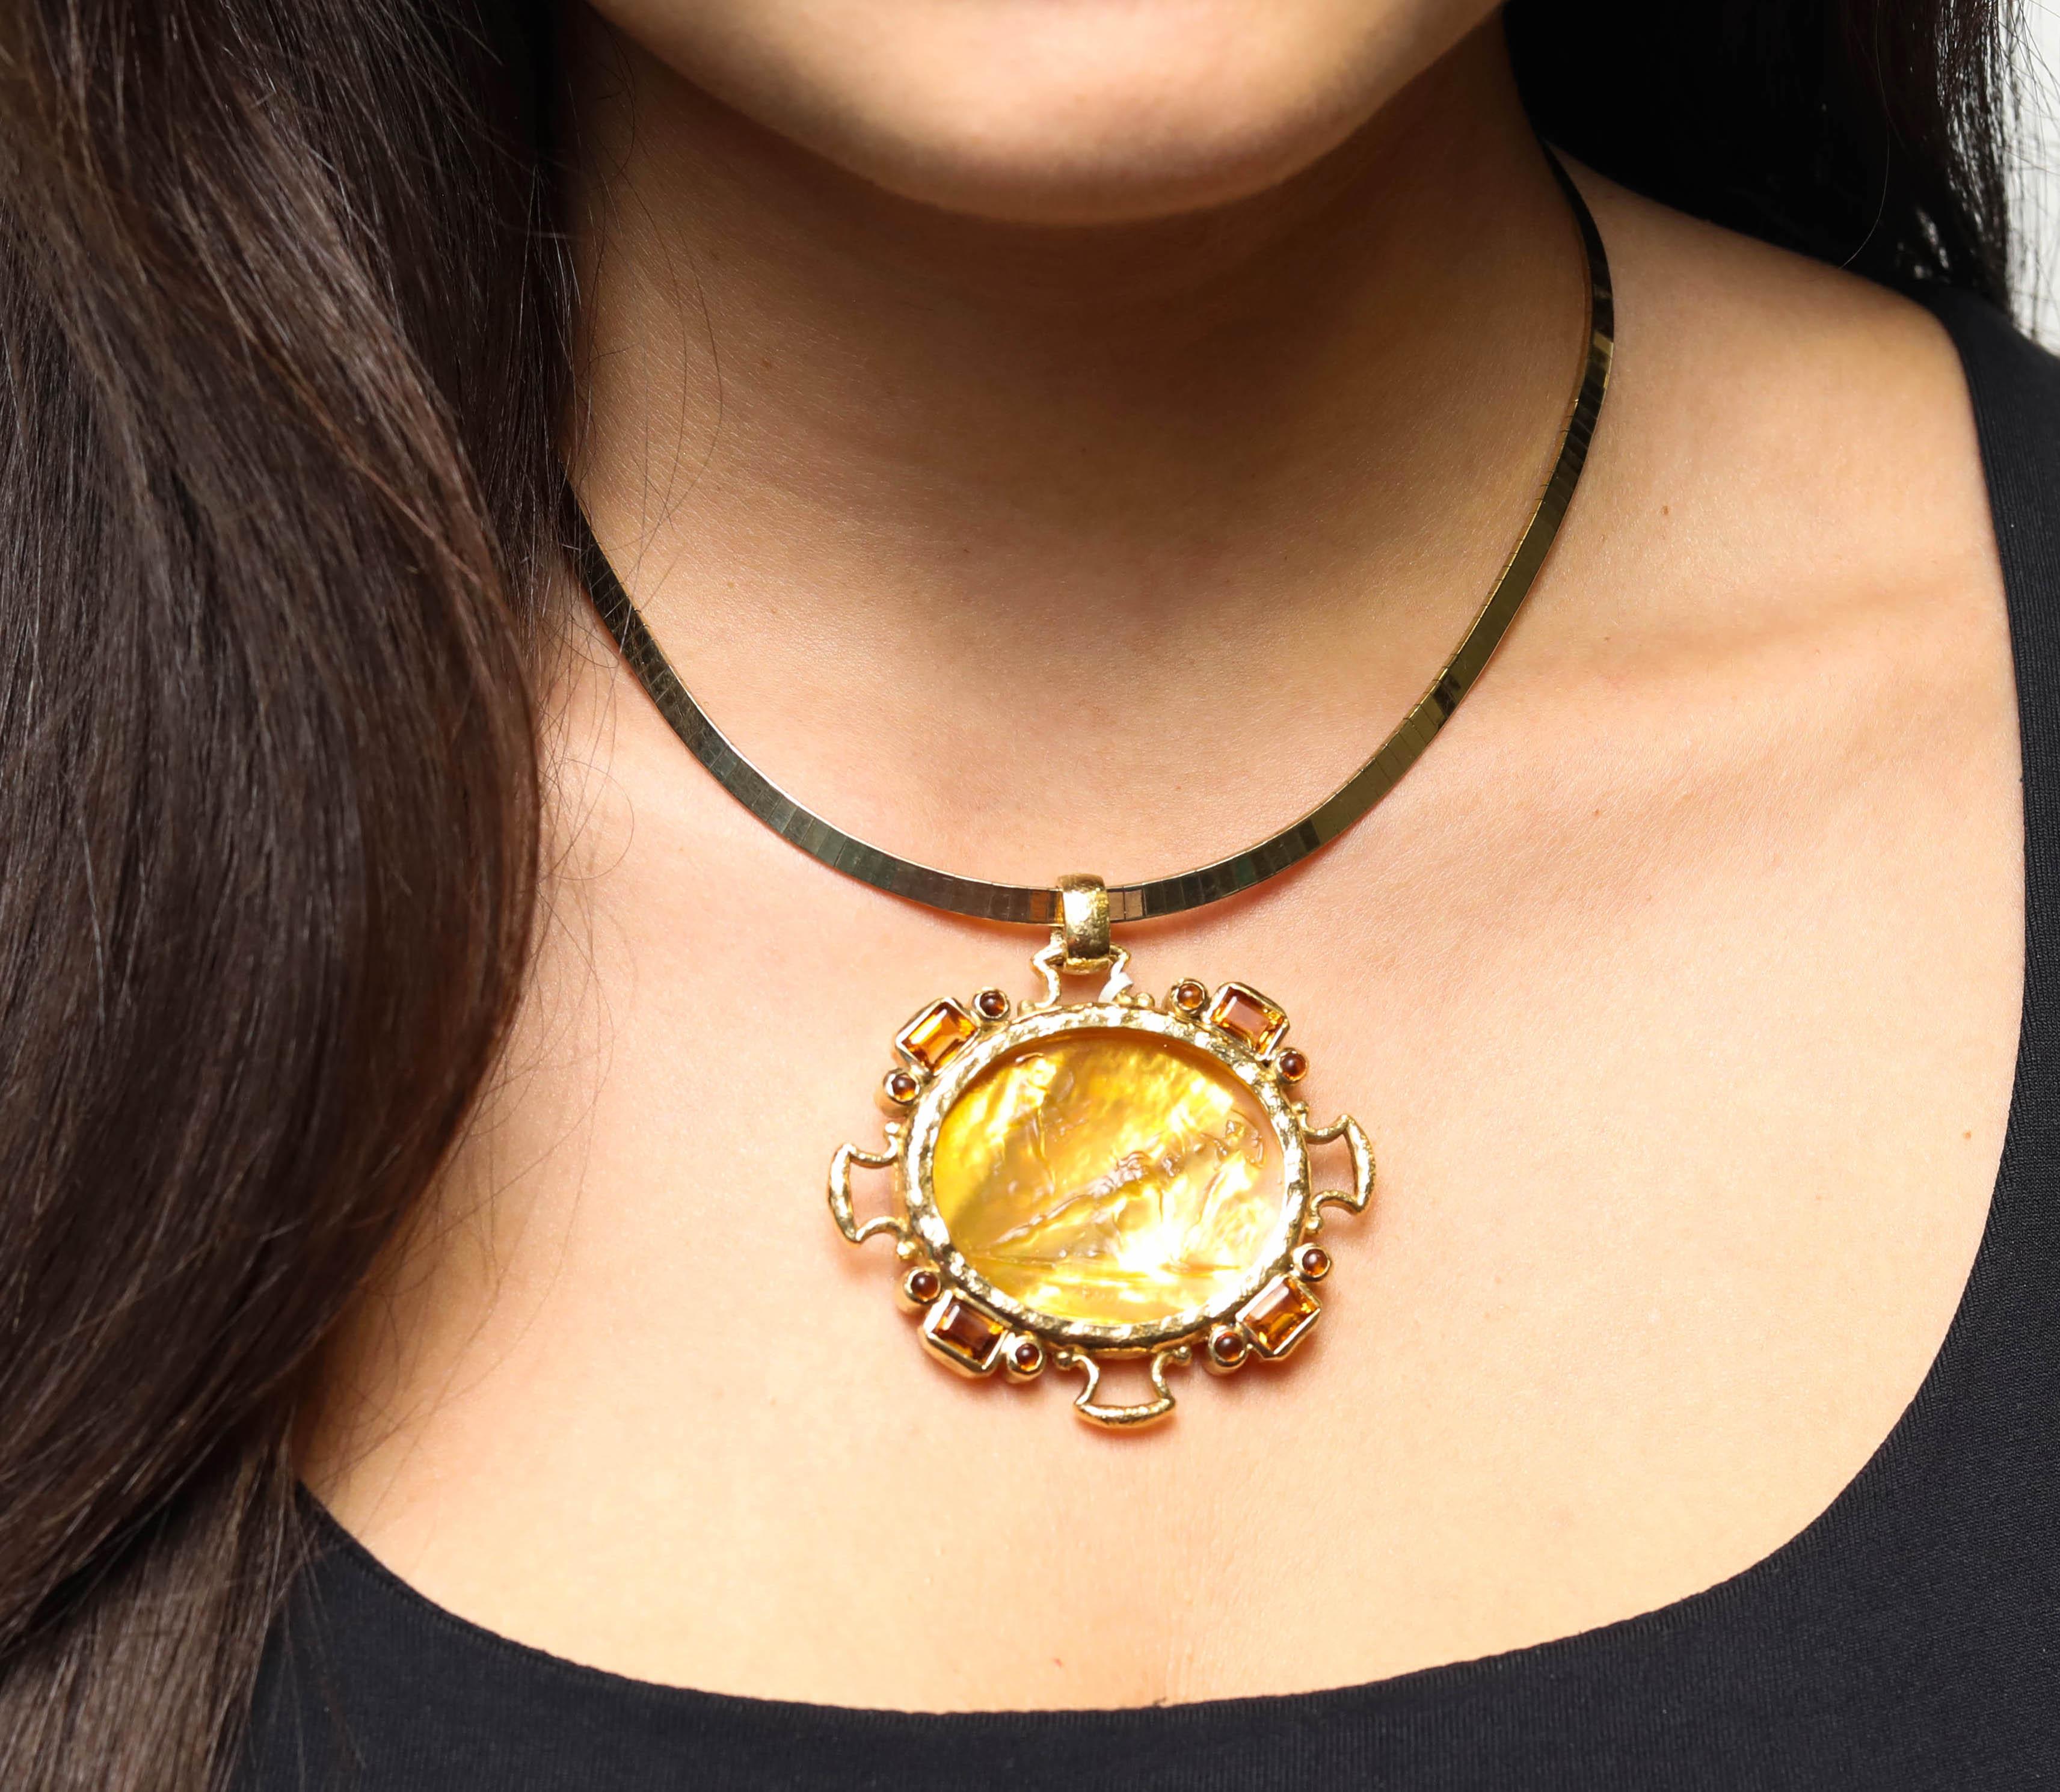 New Victorian 18k Yellow Gold Yellow Italian Murano Glass Carved Intaglio Pendant

A cameo, an intaglio is created by carving below the surface to produce an image in relief, with the purpose of pressing into sealing wax. Intaglios were often used